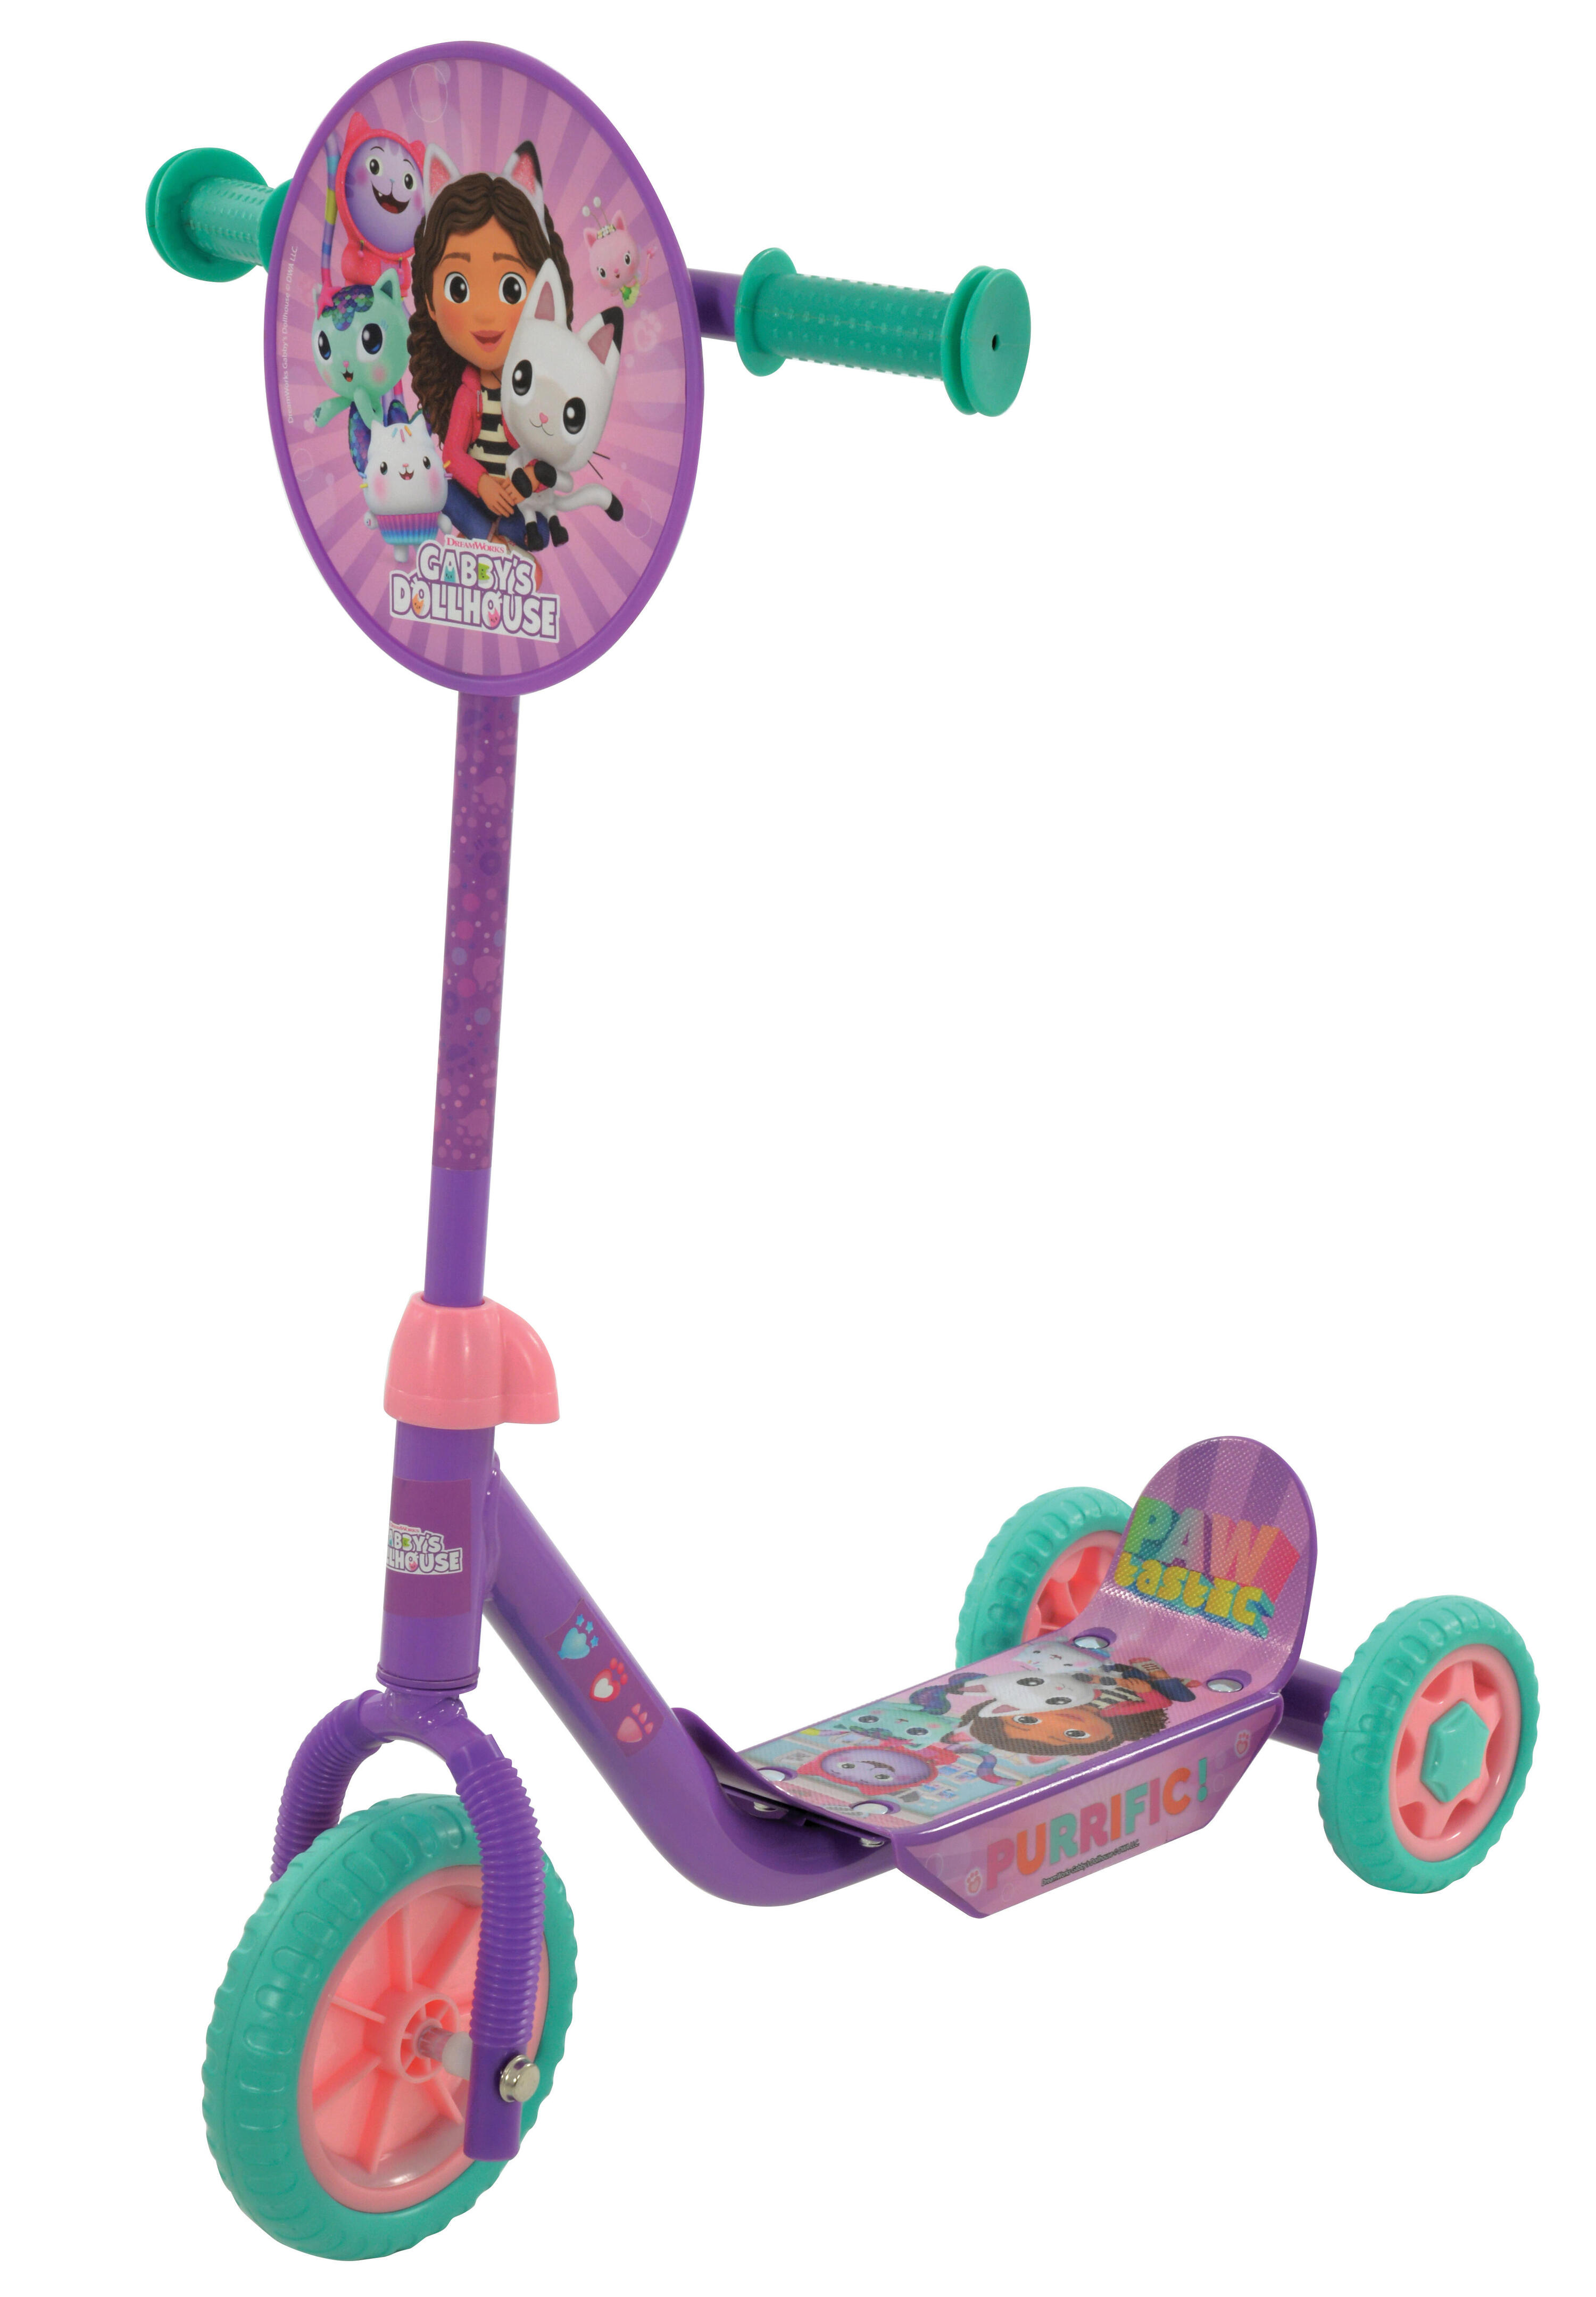 Gabby's Dollhouse  Deluxe Tri-Scooter 7/7